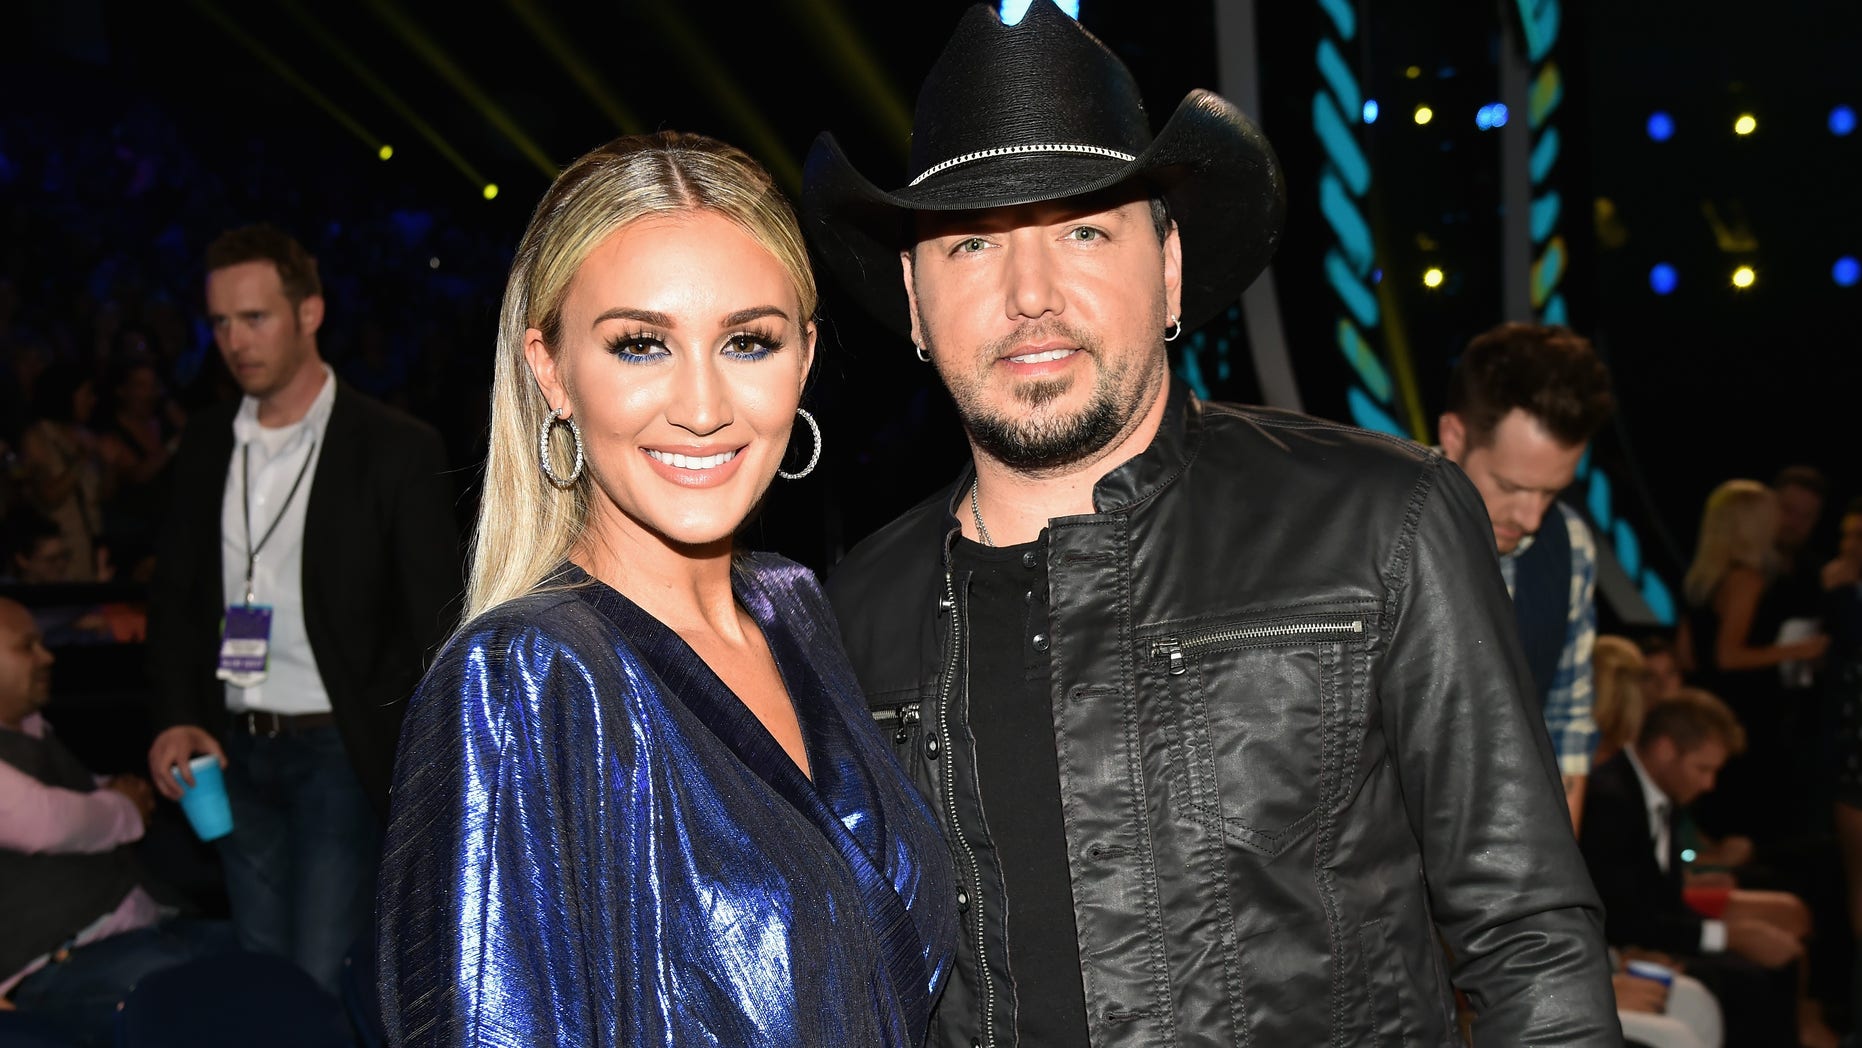 Jason Aldean and Brittany Kerr revealed they will be naming their daughter Navy.